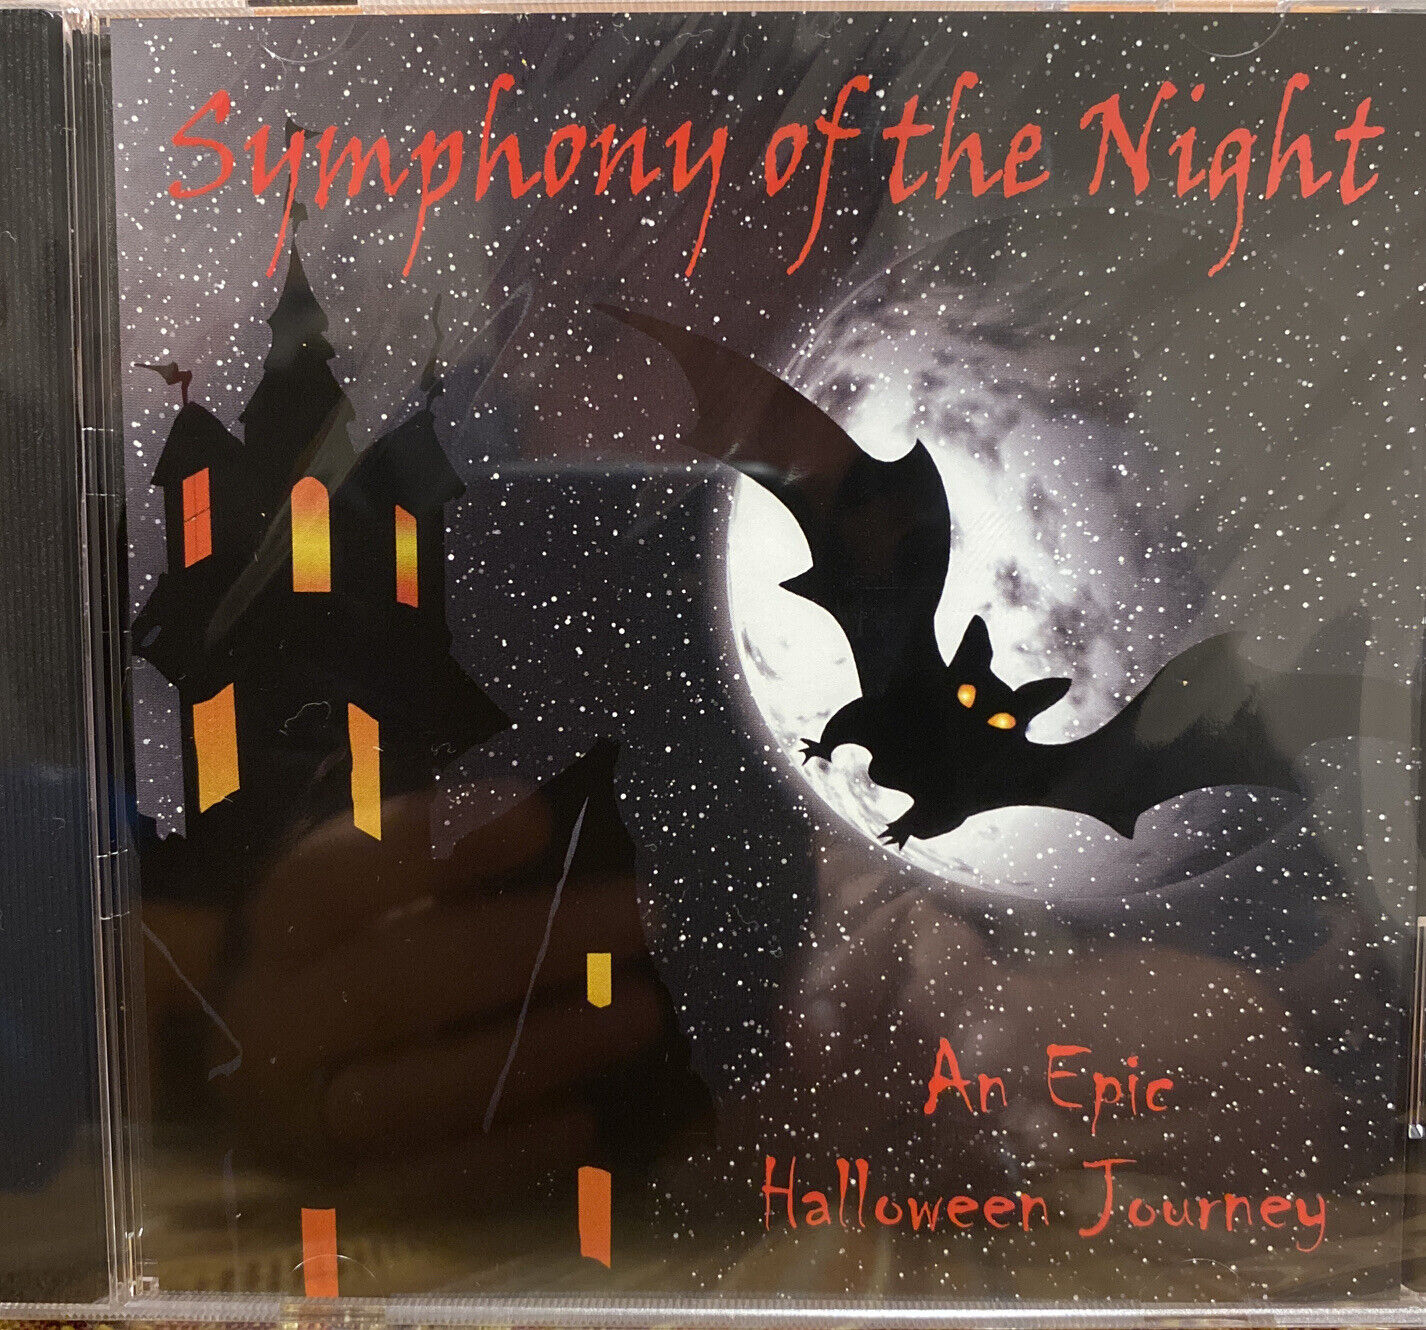 Symphony of the Night Halloween CD: Music And Sound Effects For Decorating